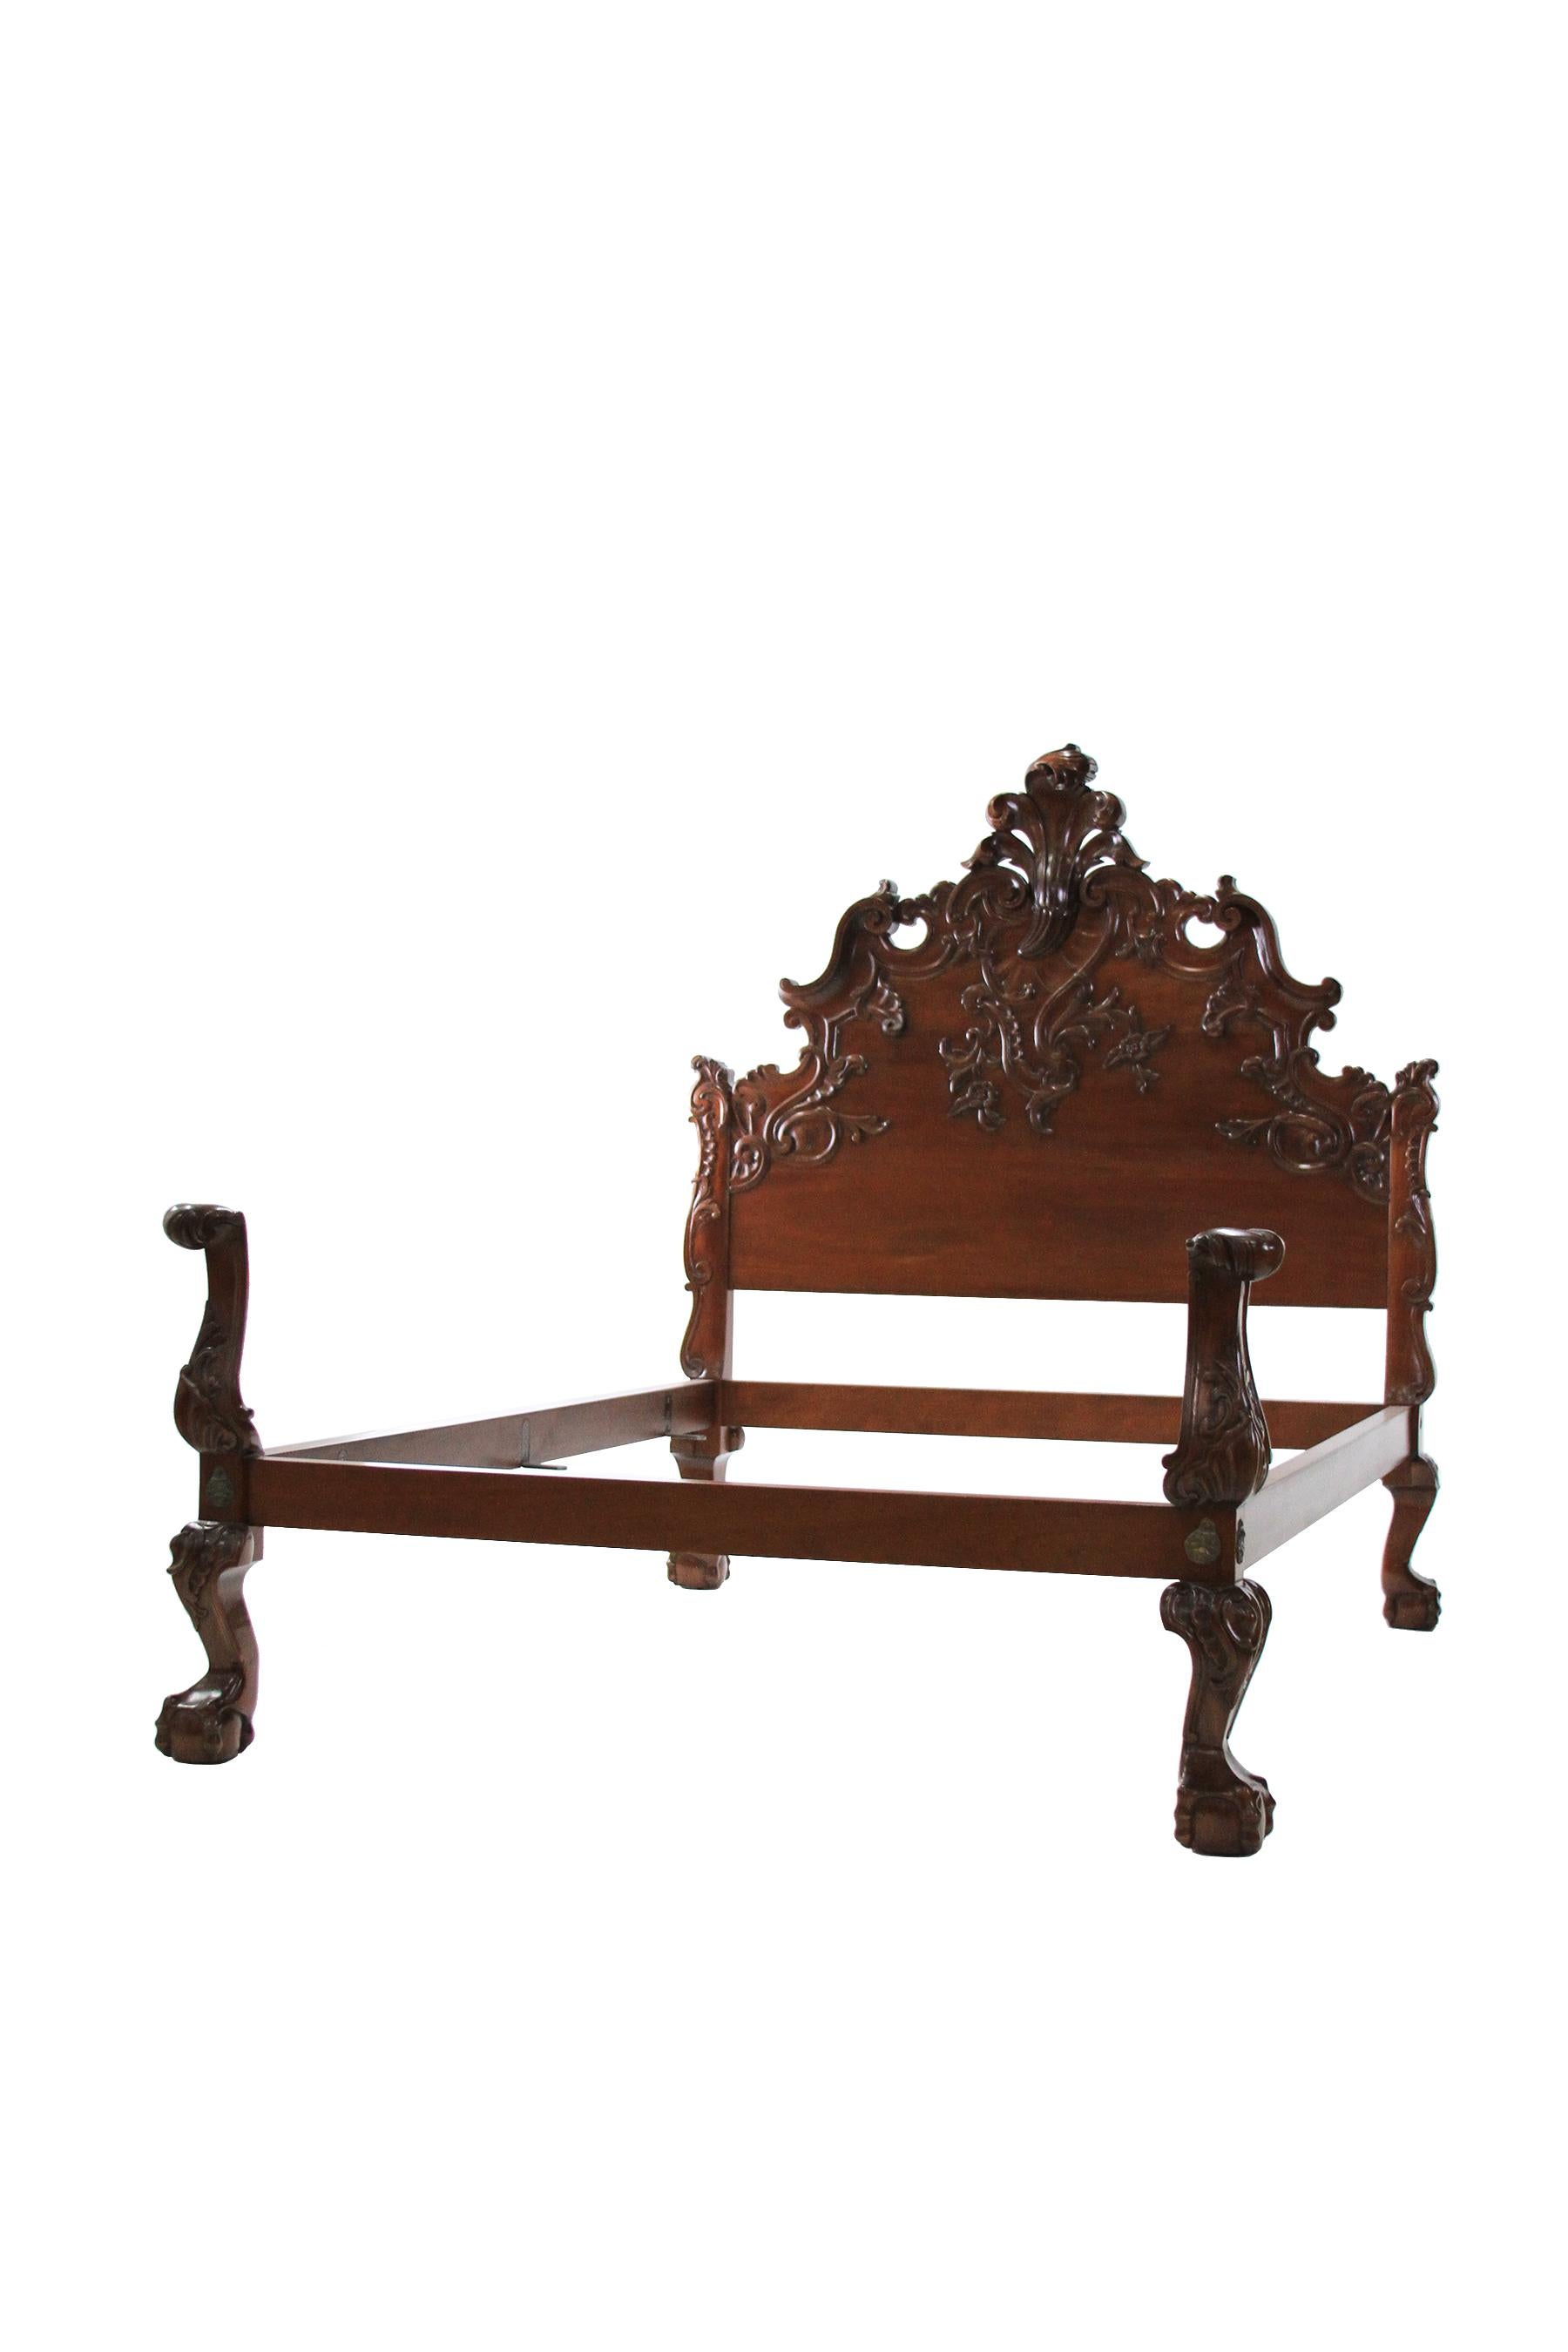 This limited edition King Sized Spanish Rococo style bed is hand-carved with a unique asymmetrically flourished headboard, intricately carved in solid Mahogany. This bed is shown in a Queen, there is only one King available and two Queens as a